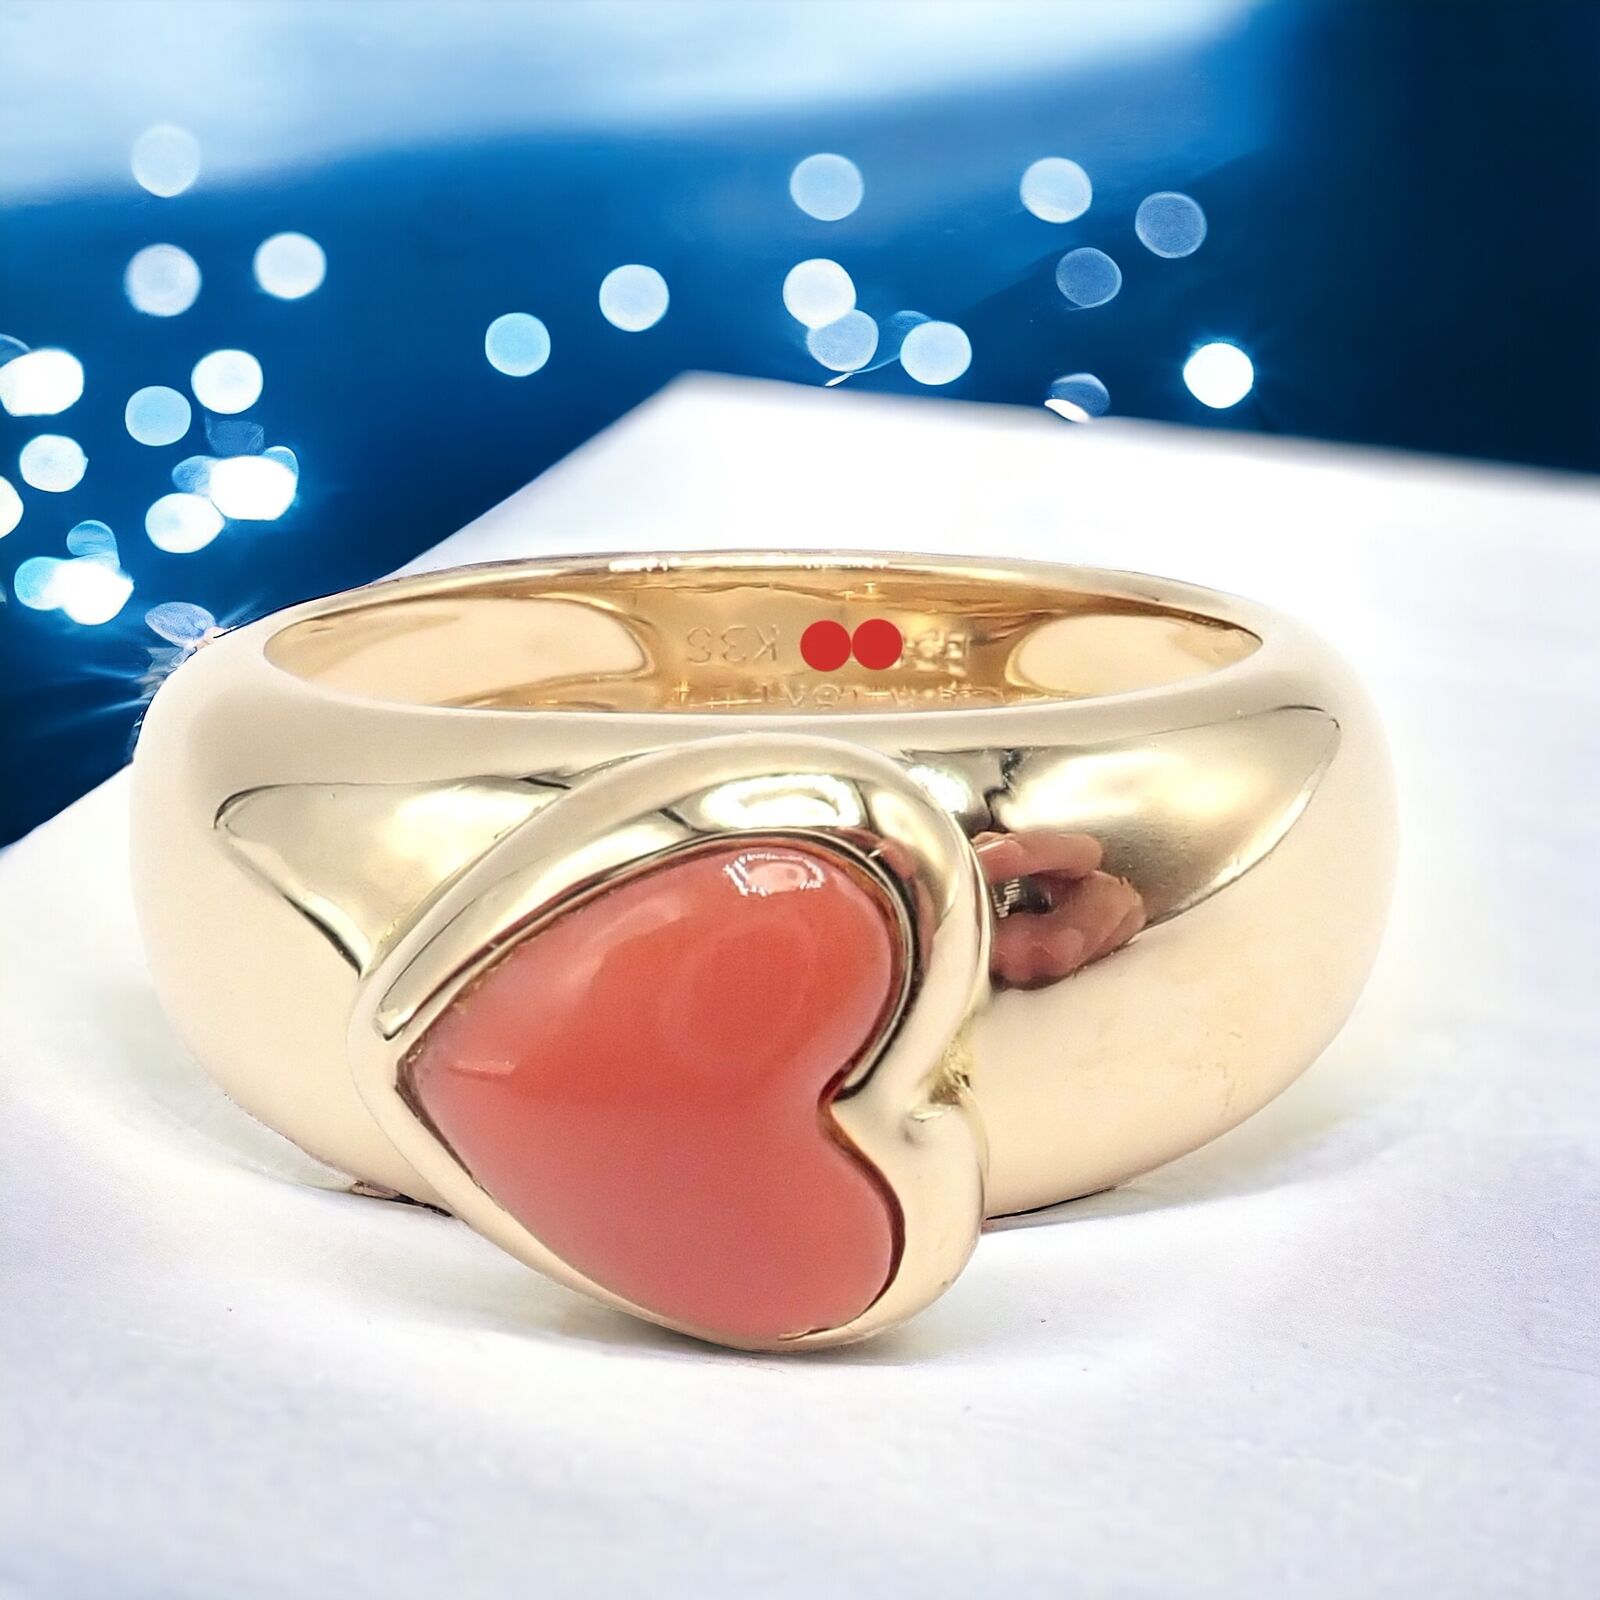 Van Cleef & Arpels Jewelry & Watches:Fine Jewelry:Rings Rare! Authentic Van Cleef & Arpels 18k Yellow Gold Coral Heart Ring sz 4.5